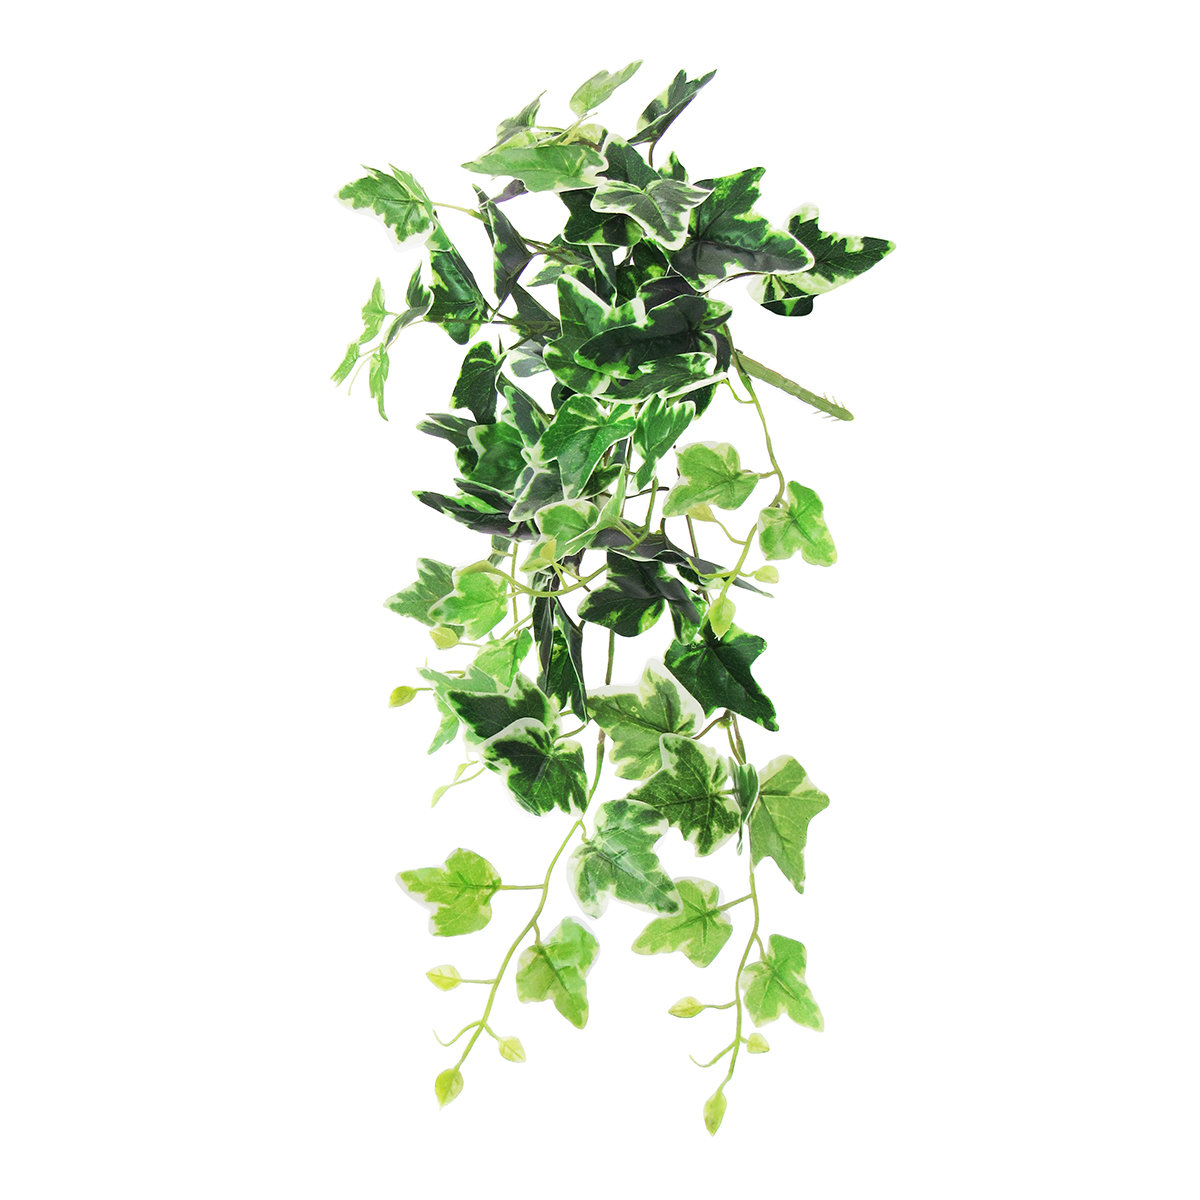 Decoration Green Artificial Leaves Ficus Ivy, Packaging Size: 24